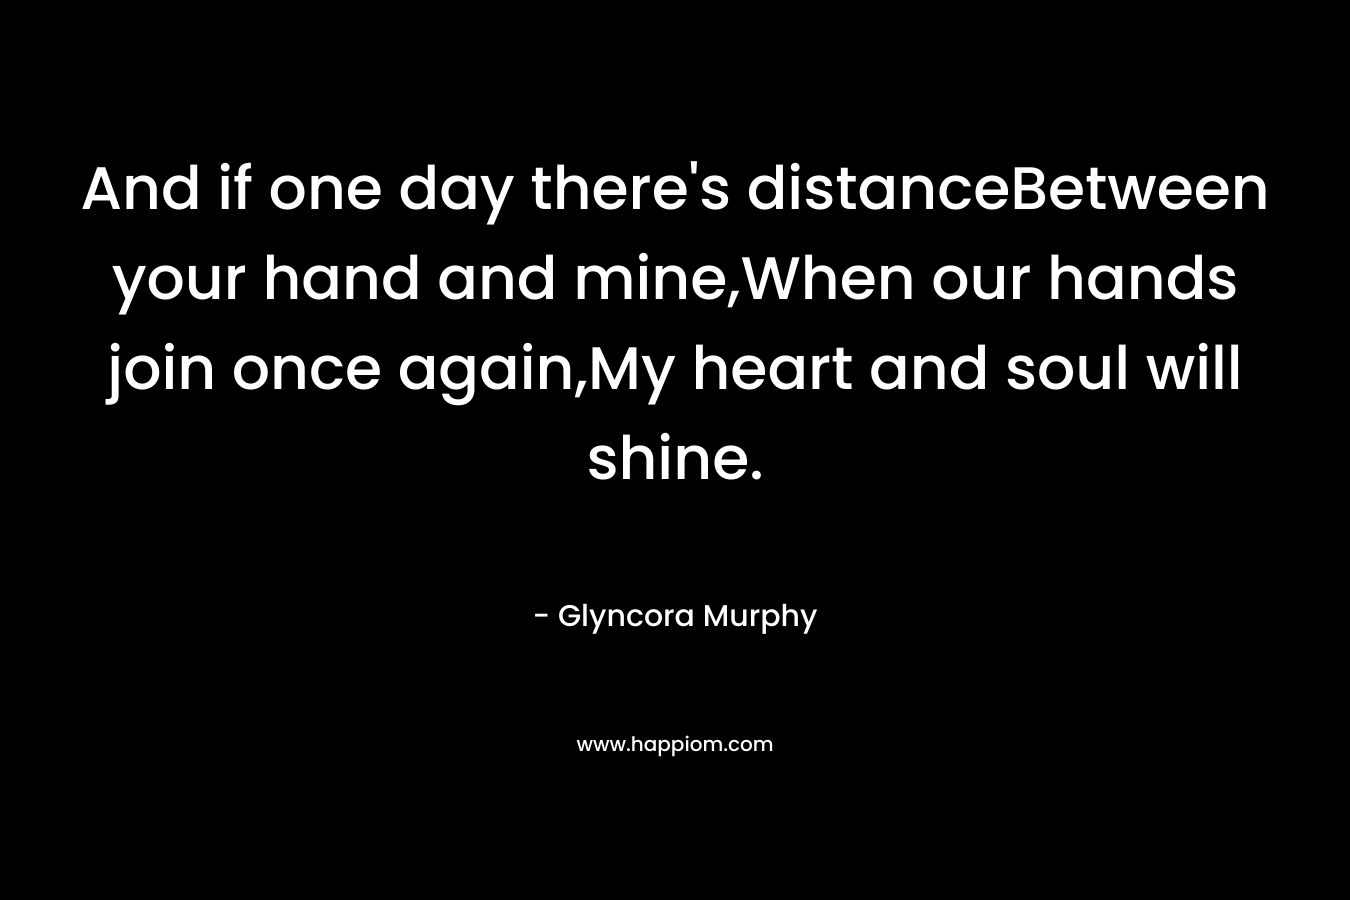 And if one day there’s distanceBetween your hand and mine,When our hands join once again,My heart and soul will shine. – Glyncora Murphy